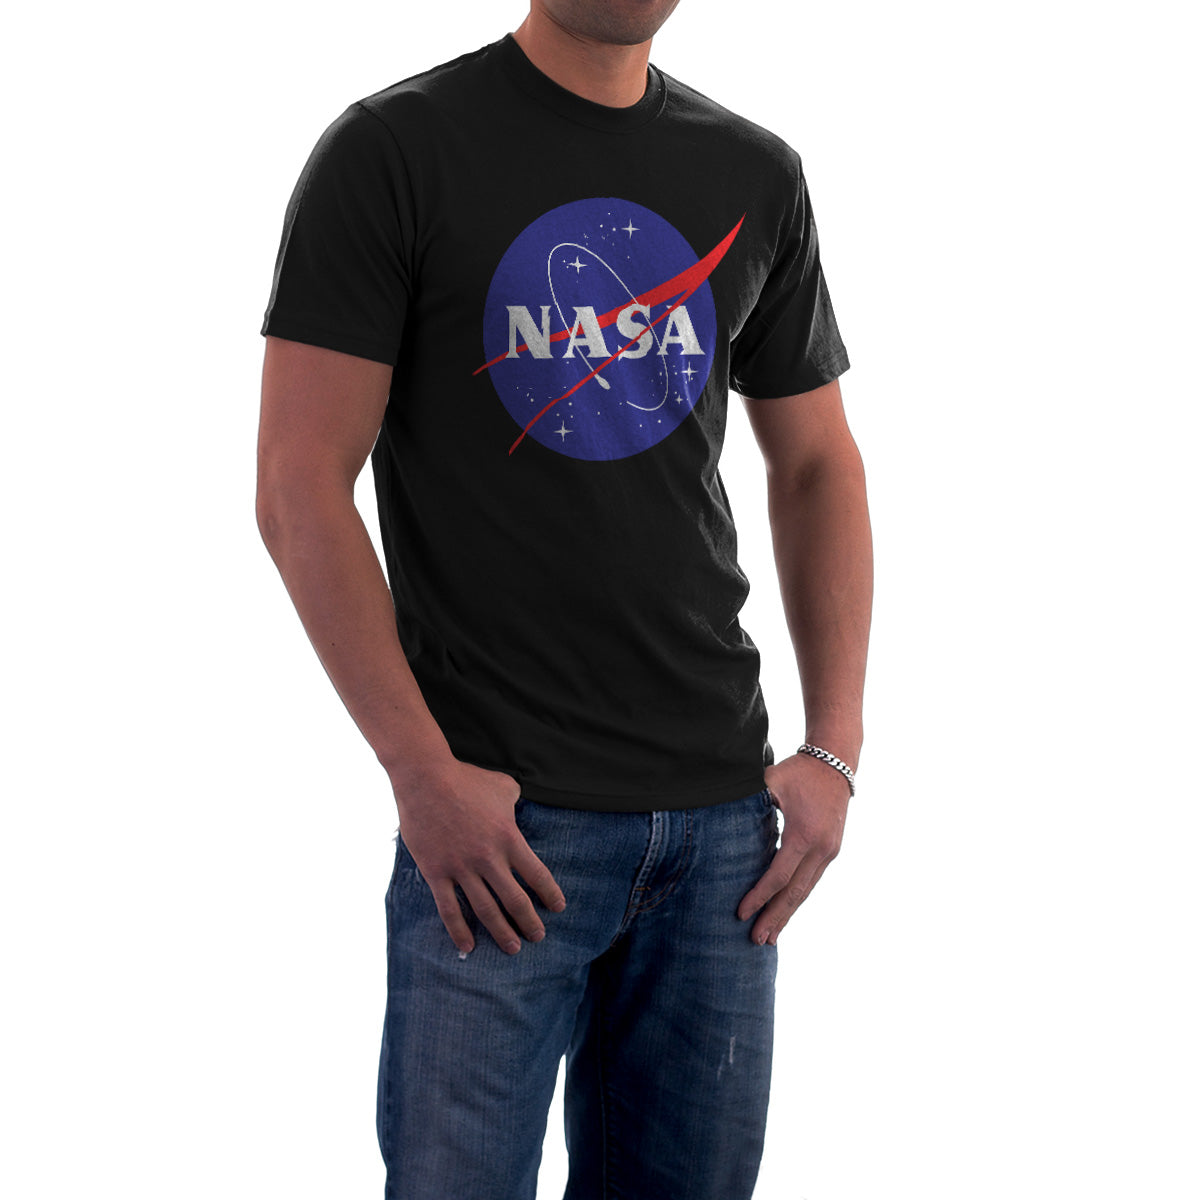 iberry's Printed T-Shirt for Men |Funny Quote Tshirt | Half Sleeve T shirts | Round Neck T Shirt |Cotton T-Shirt for Men- Nasa